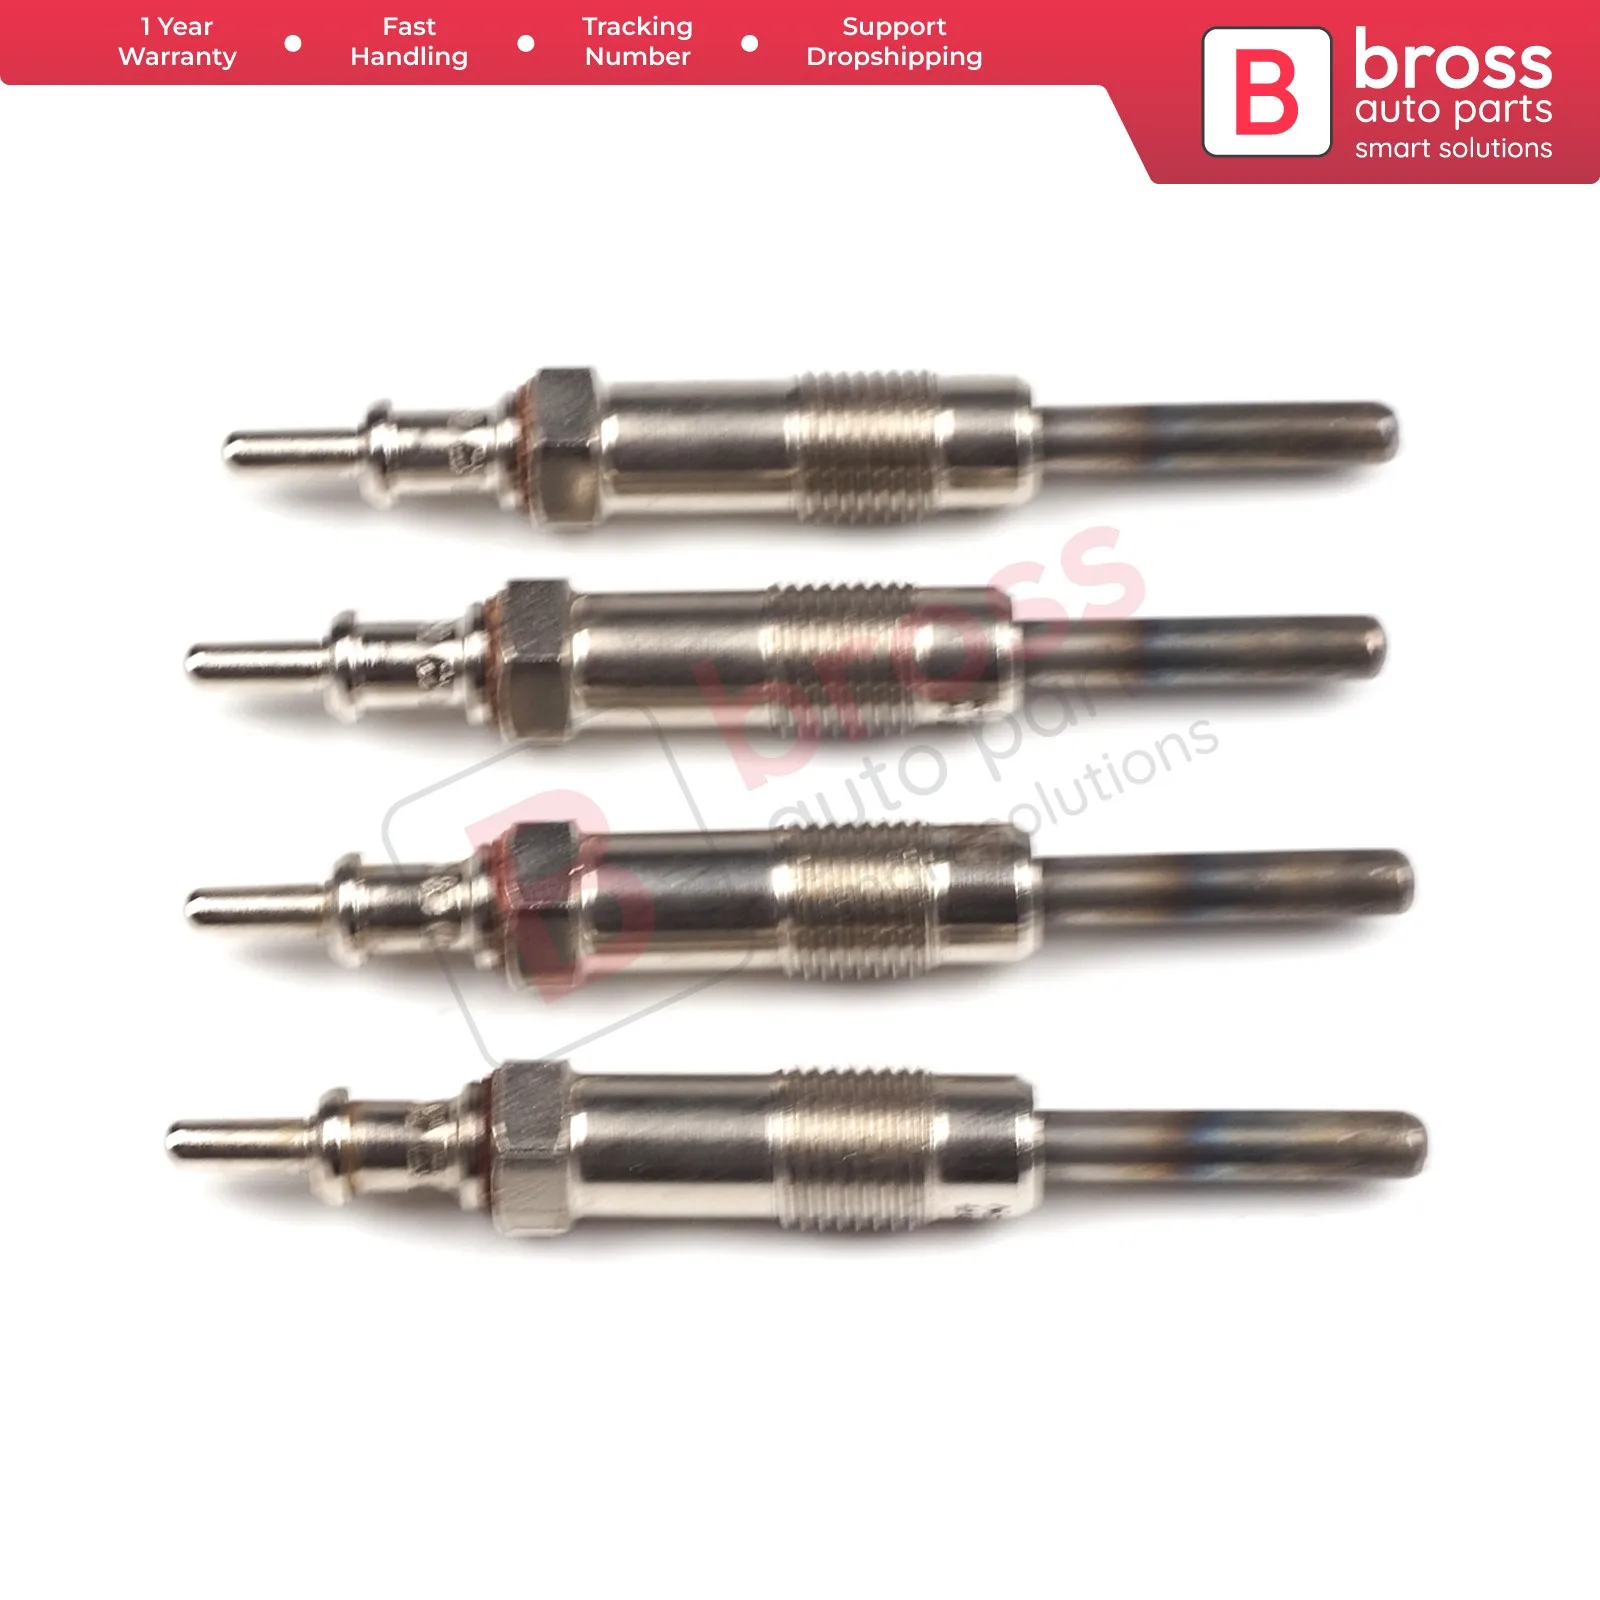 

Bross Auto Parts BGP27-1 4 Pcs Heater Glow Plugs GX86, 0011592601, GN961 for Mercedes Sprinter Vario 2.9 D Ship From Turkey